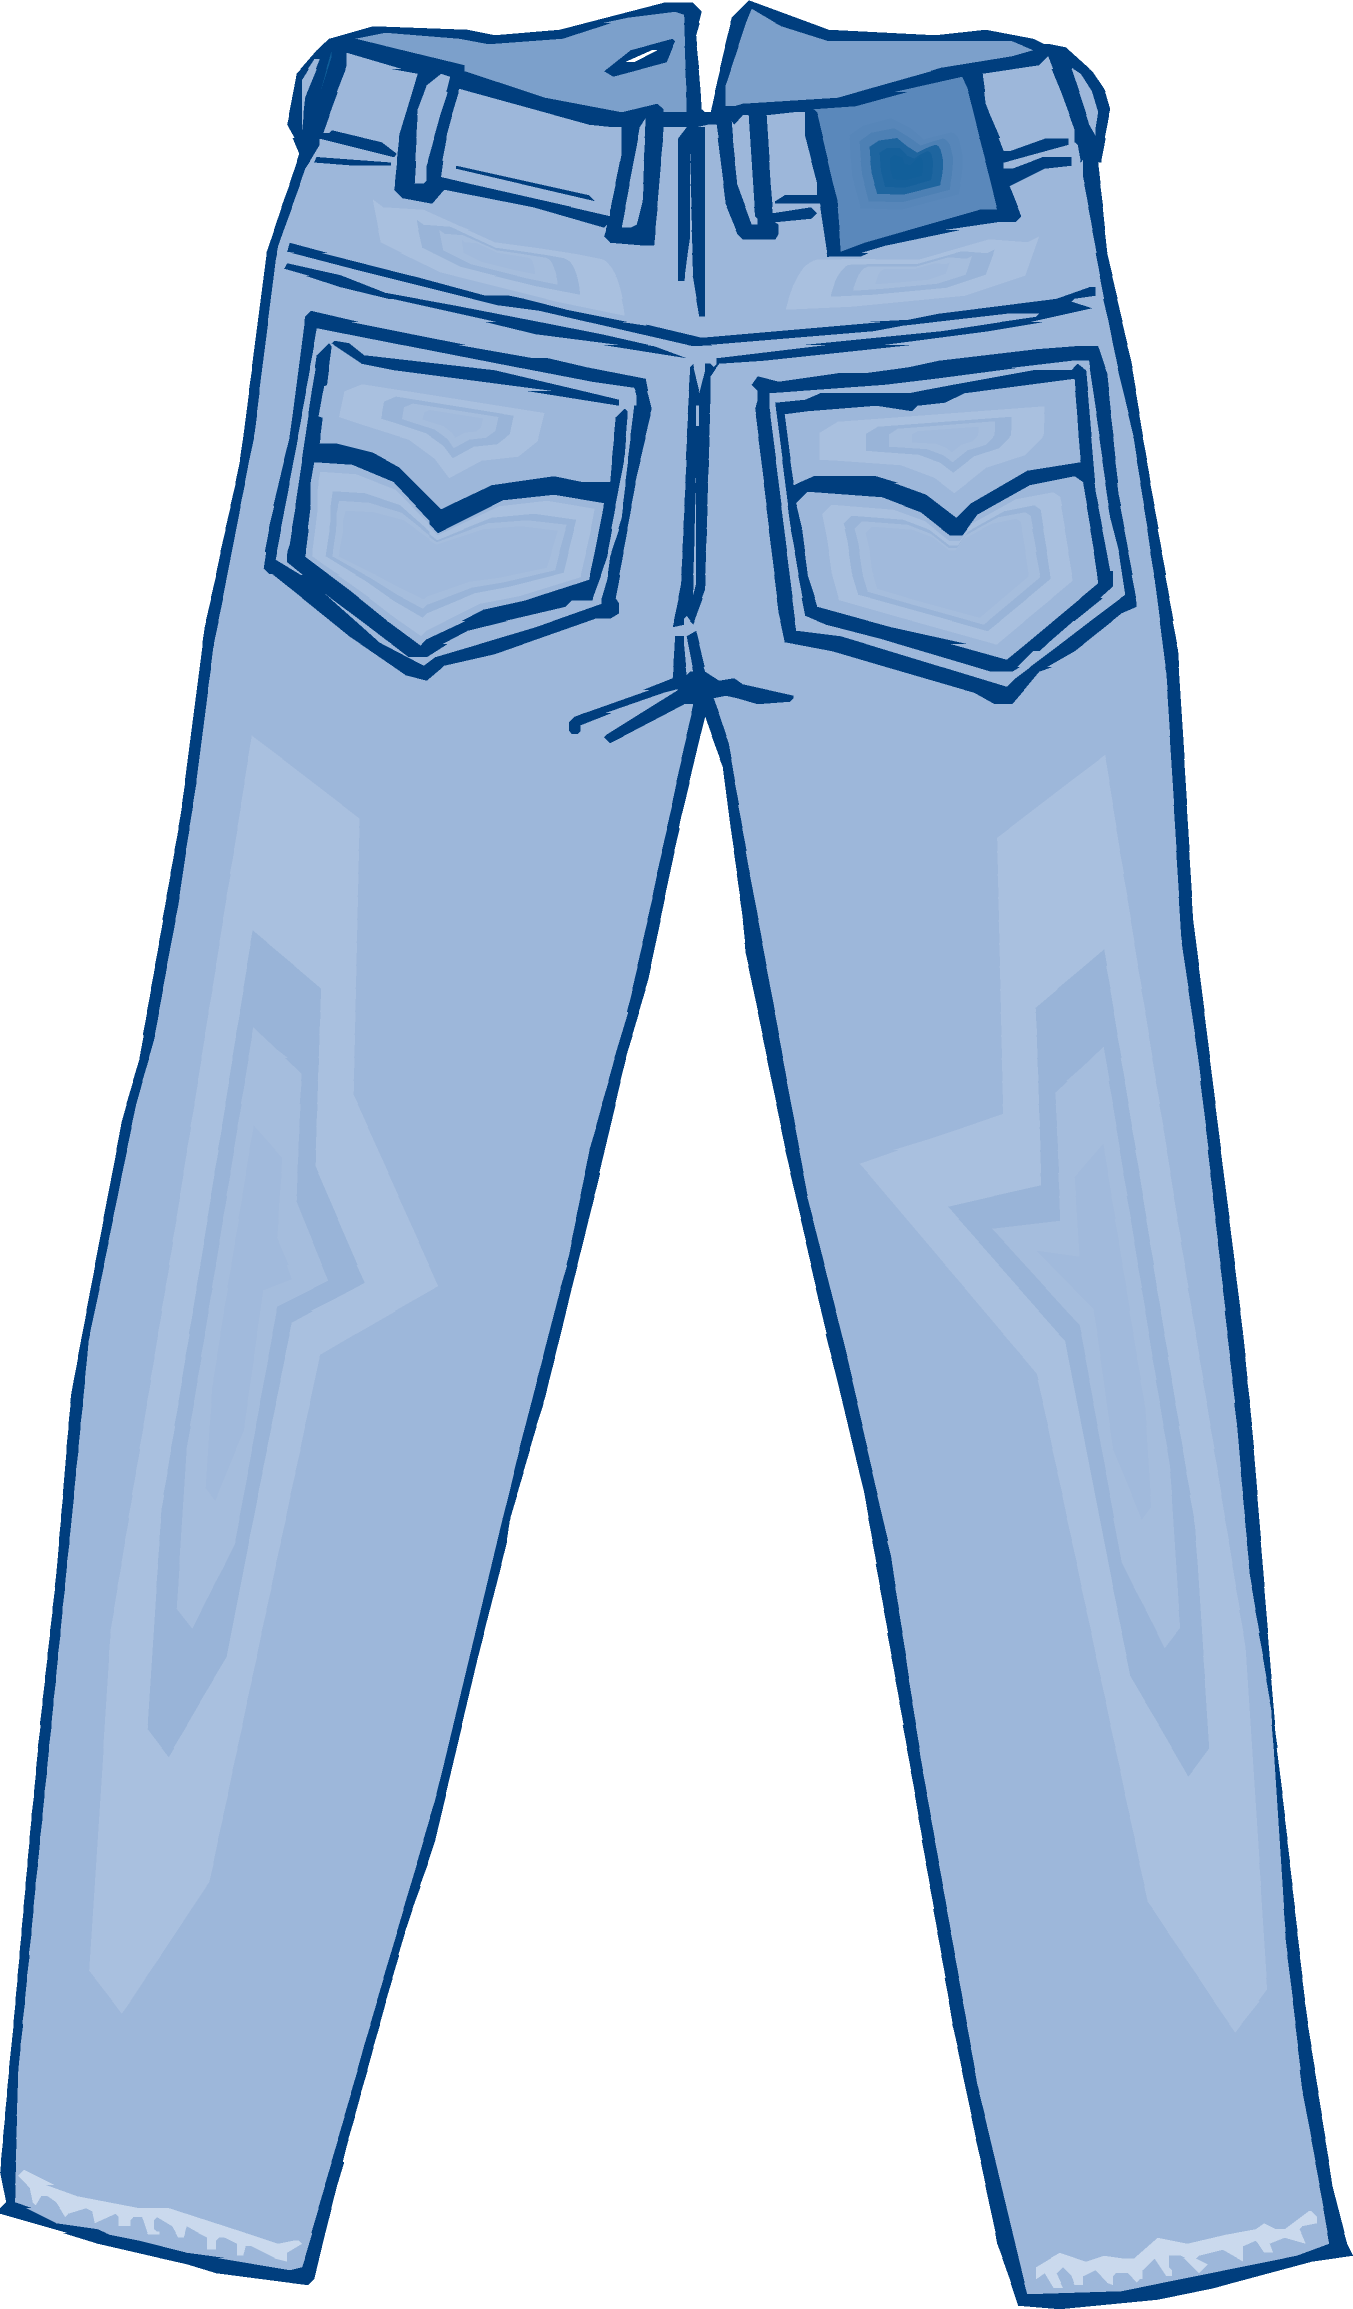 10 Image Of Jeans Free Cliparts That You Can Download To You Computer